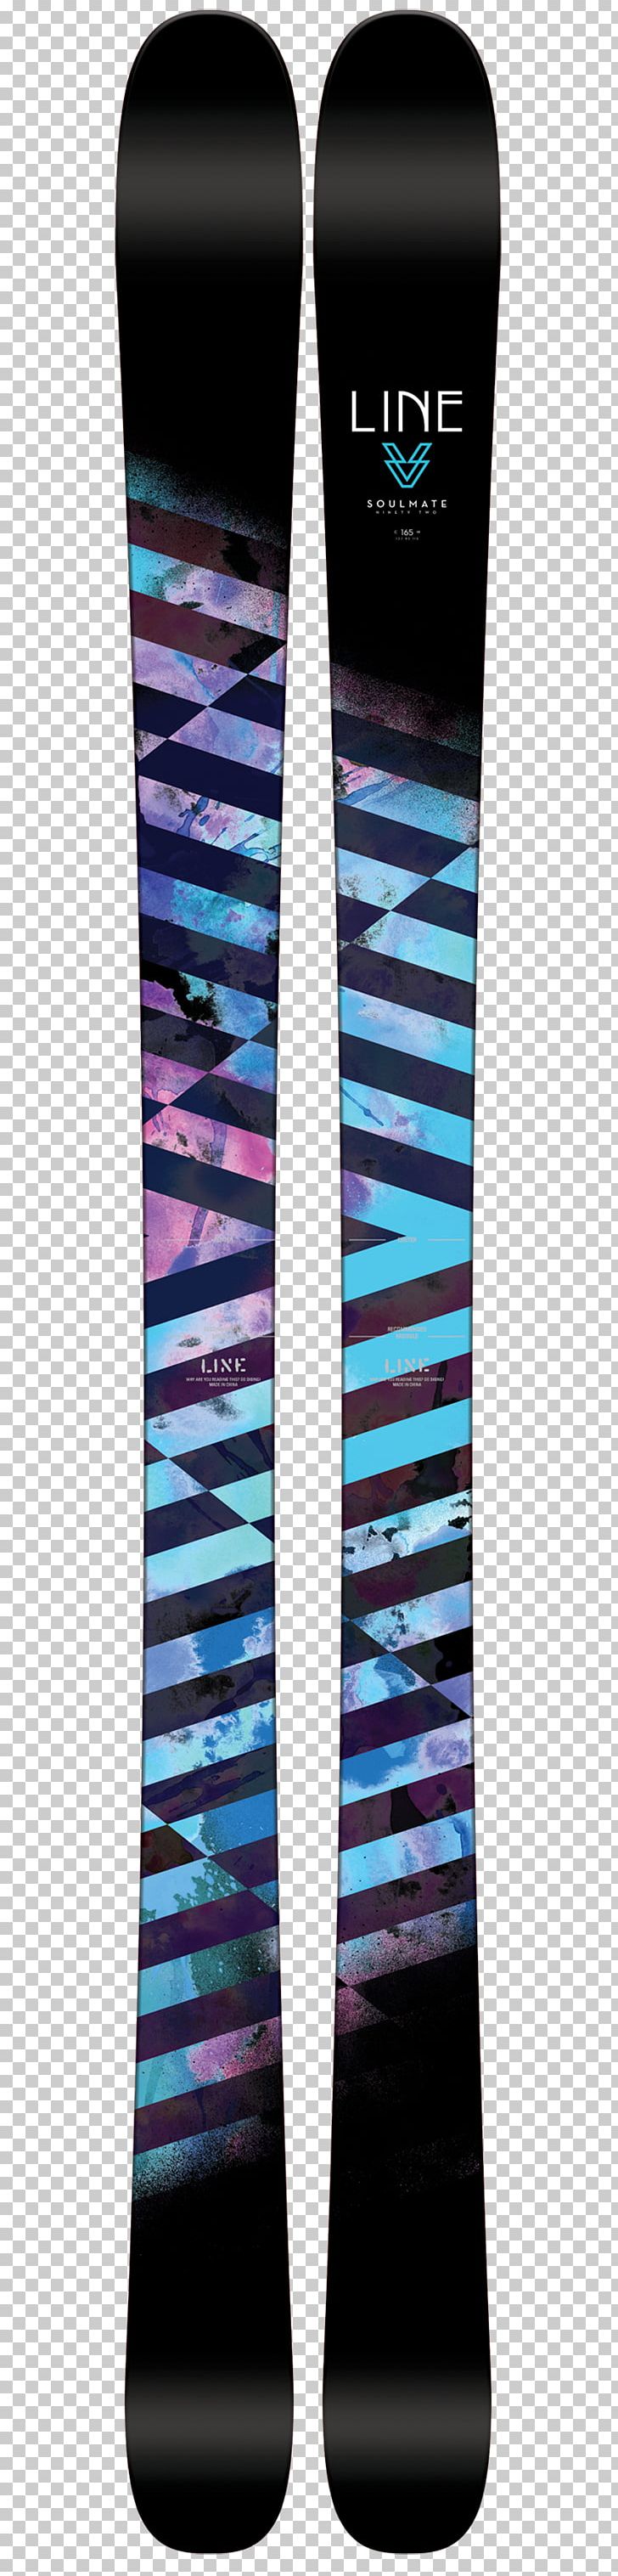 Line Skis Line Supernatural 92 2015/16 Freeskiing Freeriding PNG, Clipart, Alpine Skiing, Backcountry Skiing, Carving, Dynastar, Electric Blue Free PNG Download